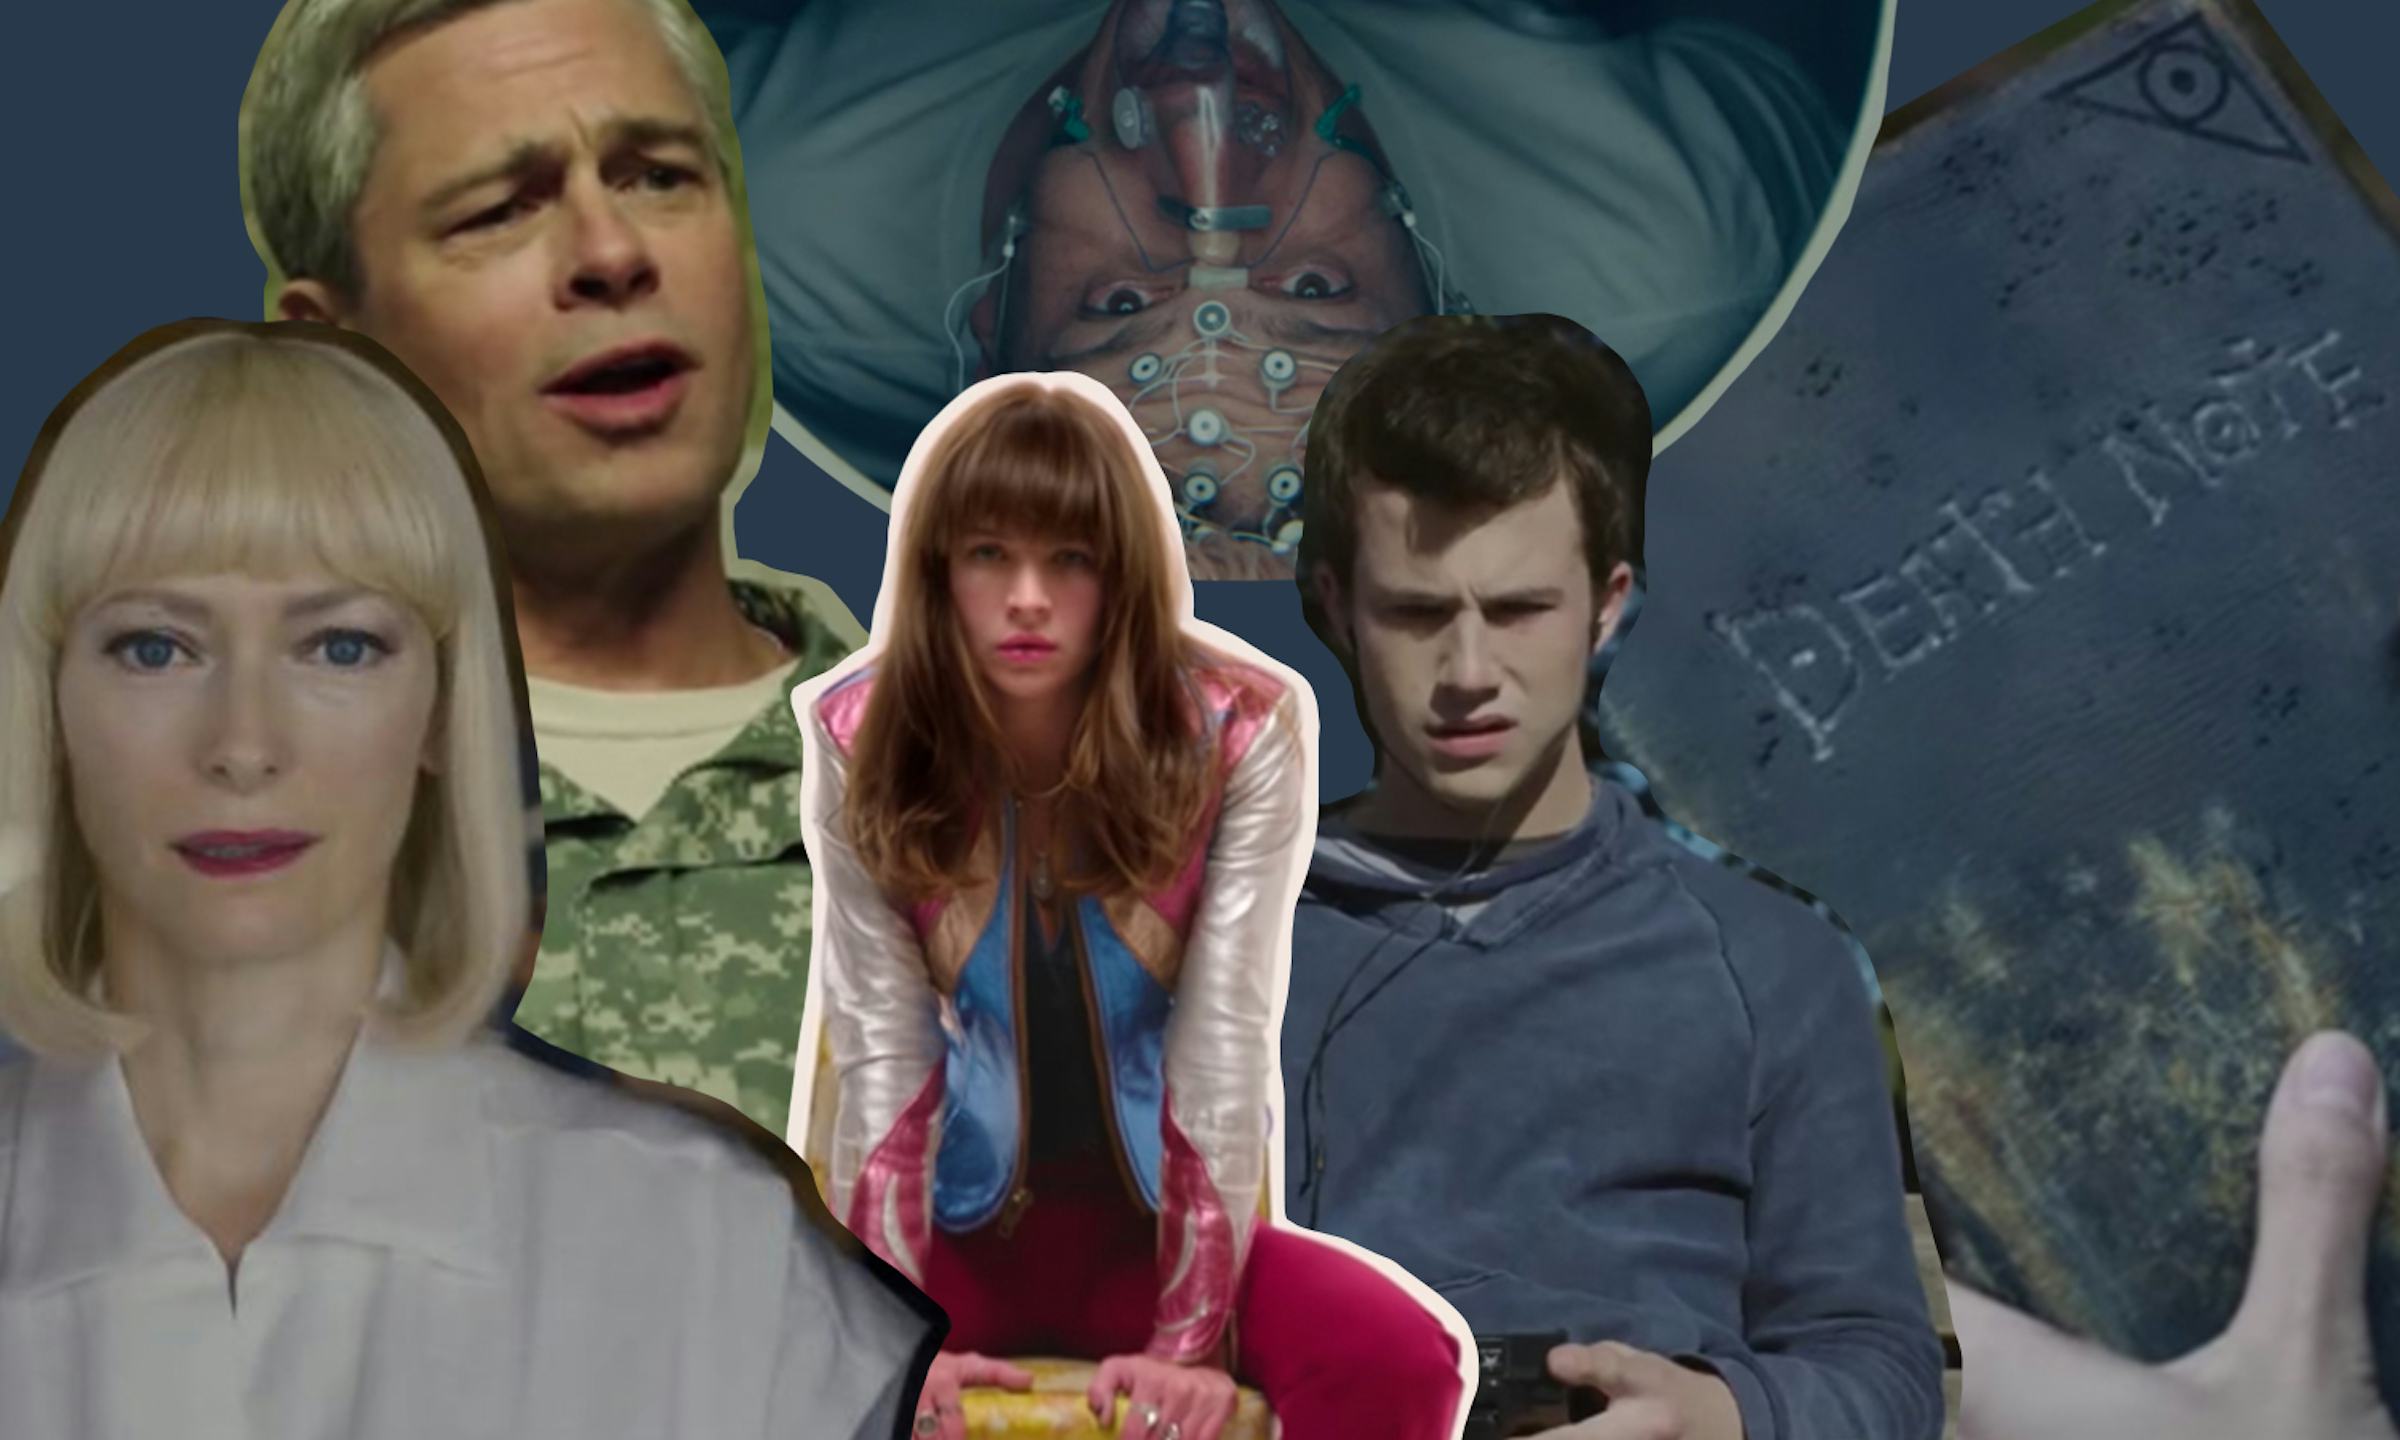 Ranking The 40 New Netflix Shows And Movies We Can’t Wait To See